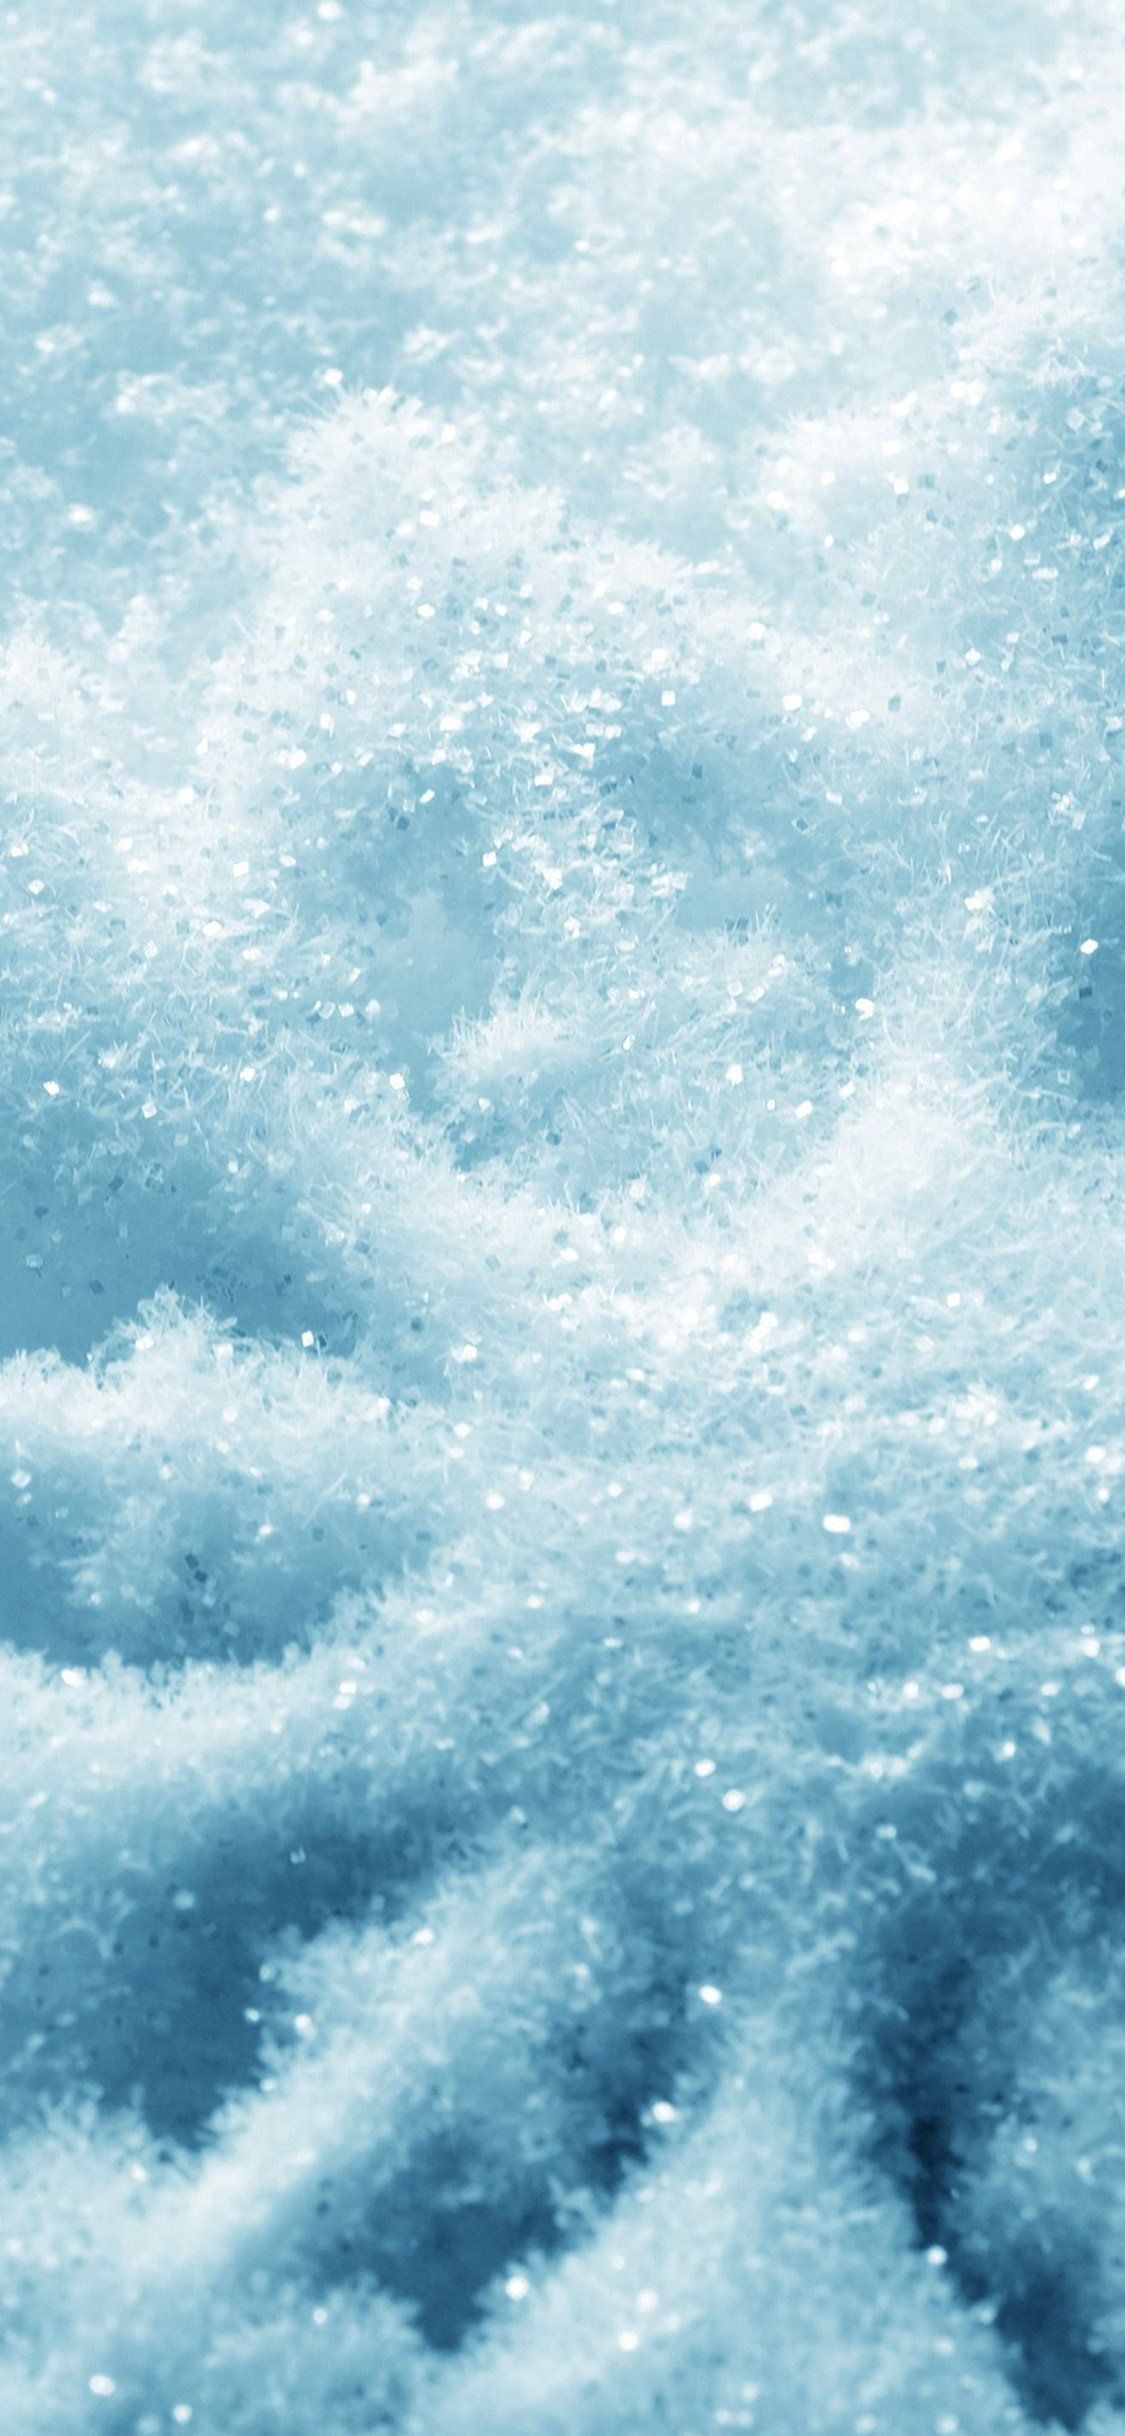 Snow Close up iPhone X Wallpaper Free Download